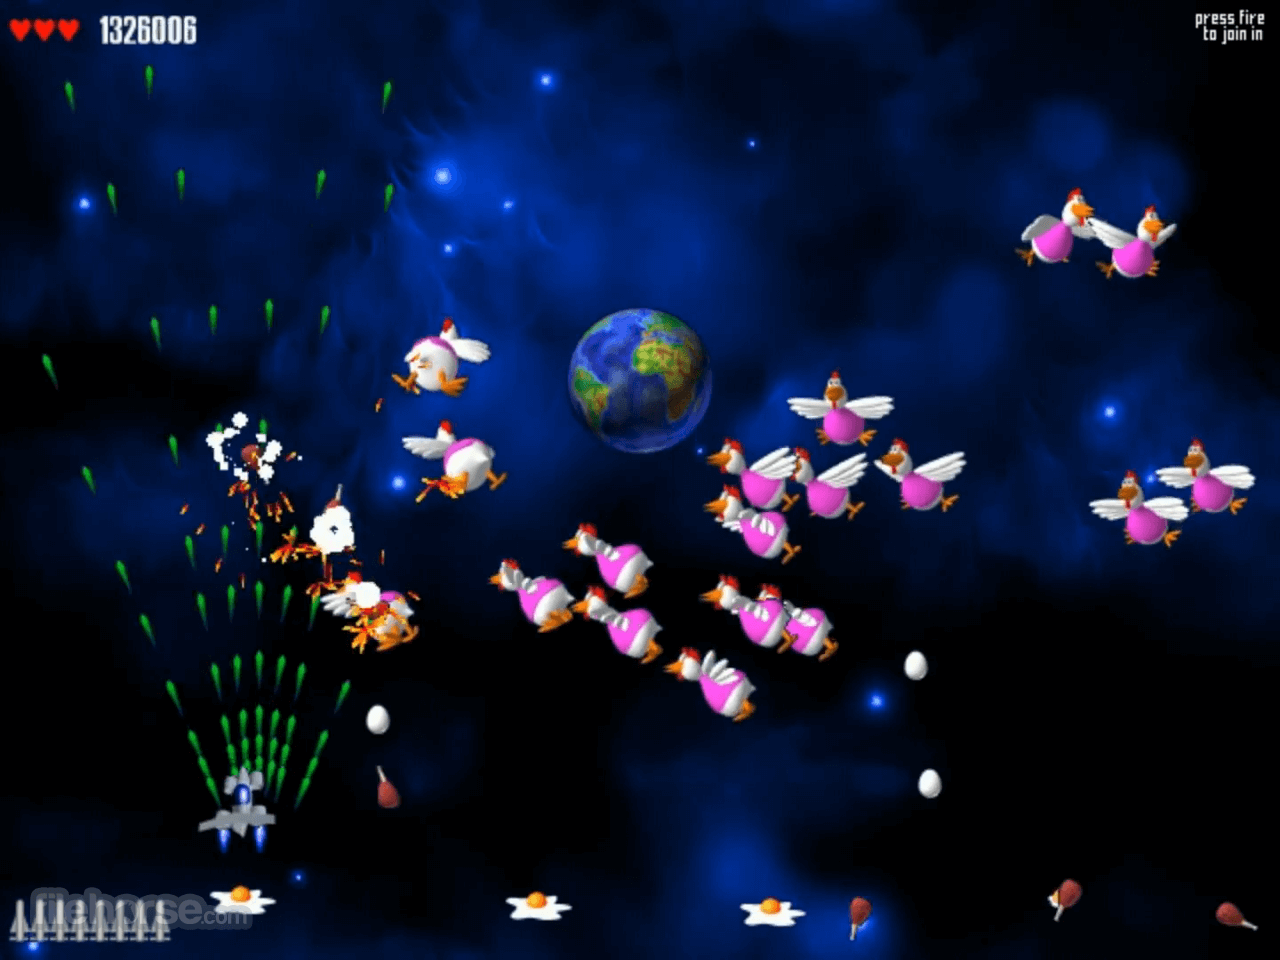 chicken invaders universe pc download